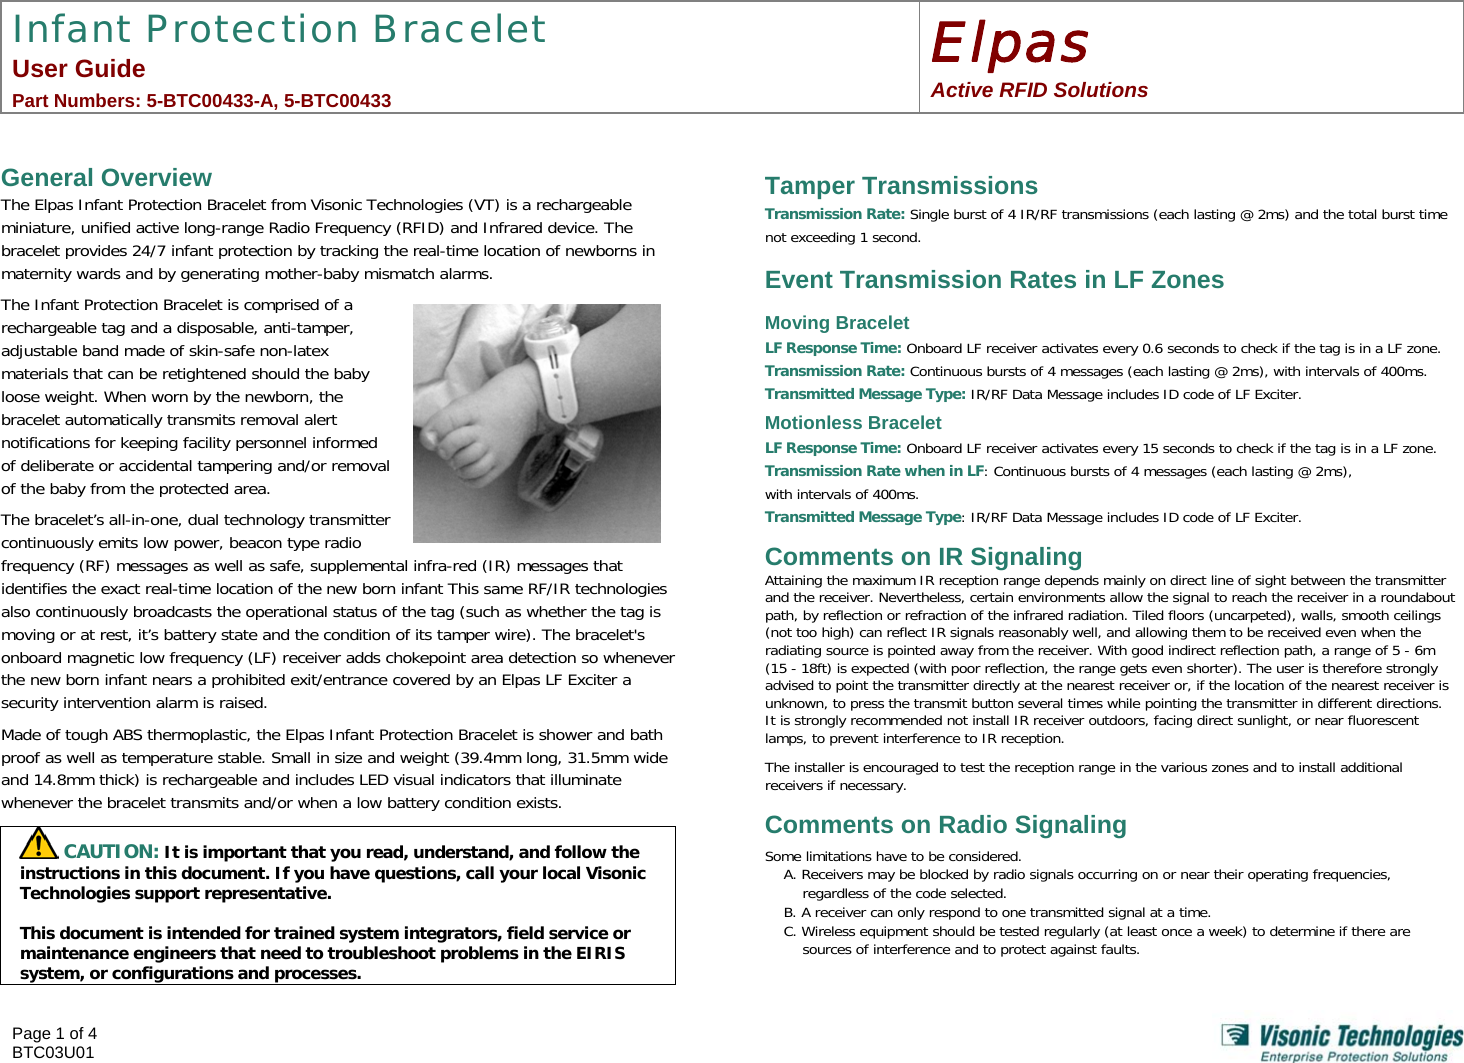 Infant Protection Bracelet User Guide  Part Numbers: 5-BTC00433-A, 5-BTC00433 Elpas Active RFID Solutions   Page 1 of 4 BTC03U01     General Overview The Elpas Infant Protection Bracelet from Visonic Technologies (VT) is a rechargeable miniature, unified active long-range Radio Frequency (RFID) and Infrared device. The bracelet provides 24/7 infant protection by tracking the real-time location of newborns in maternity wards and by generating mother-baby mismatch alarms. The Infant Protection Bracelet is comprised of a rechargeable tag and a disposable, anti-tamper, adjustable band made of skin-safe non-latex materials that can be retightened should the baby loose weight. When worn by the newborn, the bracelet automatically transmits removal alert notifications for keeping facility personnel informed of deliberate or accidental tampering and/or removal of the baby from the protected area. The bracelet’s all-in-one, dual technology transmitter continuously emits low power, beacon type radio frequency (RF) messages as well as safe, supplemental infra-red (IR) messages that identifies the exact real-time location of the new born infant This same RF/IR technologies also continuously broadcasts the operational status of the tag (such as whether the tag is moving or at rest, it’s battery state and the condition of its tamper wire). The bracelet&apos;s onboard magnetic low frequency (LF) receiver adds chokepoint area detection so whenever the new born infant nears a prohibited exit/entrance covered by an Elpas LF Exciter a security intervention alarm is raised. Made of tough ABS thermoplastic, the Elpas Infant Protection Bracelet is shower and bath proof as well as temperature stable. Small in size and weight (39.4mm long, 31.5mm wide and 14.8mm thick) is rechargeable and includes LED visual indicators that illuminate whenever the bracelet transmits and/or when a low battery condition exists.   CAUTION: It is important that you read, understand, and follow the instructions in this document. If you have questions, call your local Visonic Technologies support representative.  This document is intended for trained system integrators, field service or maintenance engineers that need to troubleshoot problems in the EIRIS system, or configurations and processes.      Tamper Transmissions  Transmission Rate: Single burst of 4 IR/RF transmissions (each lasting @ 2ms) and the total burst time not exceeding 1 second.  Event Transmission Rates in LF Zones Moving Bracelet LF Response Time: Onboard LF receiver activates every 0.6 seconds to check if the tag is in a LF zone. Transmission Rate: Continuous bursts of 4 messages (each lasting @ 2ms), with intervals of 400ms.  Transmitted Message Type: IR/RF Data Message includes ID code of LF Exciter. Motionless Bracelet LF Response Time: Onboard LF receiver activates every 15 seconds to check if the tag is in a LF zone. Transmission Rate when in LF: Continuous bursts of 4 messages (each lasting @ 2ms),  with intervals of 400ms. Transmitted Message Type: IR/RF Data Message includes ID code of LF Exciter. Comments on IR Signaling Attaining the maximum IR reception range depends mainly on direct line of sight between the transmitter and the receiver. Nevertheless, certain environments allow the signal to reach the receiver in a roundabout path, by reflection or refraction of the infrared radiation. Tiled floors (uncarpeted), walls, smooth ceilings (not too high) can reflect IR signals reasonably well, and allowing them to be received even when the radiating source is pointed away from the receiver. With good indirect reflection path, a range of 5 - 6m (15 - 18ft) is expected (with poor reflection, the range gets even shorter). The user is therefore strongly advised to point the transmitter directly at the nearest receiver or, if the location of the nearest receiver is unknown, to press the transmit button several times while pointing the transmitter in different directions. It is strongly recommended not install IR receiver outdoors, facing direct sunlight, or near fluorescent lamps, to prevent interference to IR reception.   The installer is encouraged to test the reception range in the various zones and to install additional receivers if necessary. Comments on Radio Signaling Some limitations have to be considered.  A. Receivers may be blocked by radio signals occurring on or near their operating frequencies, regardless of the code selected.  B. A receiver can only respond to one transmitted signal at a time. C. Wireless equipment should be tested regularly (at least once a week) to determine if there are sources of interference and to protect against faults. 